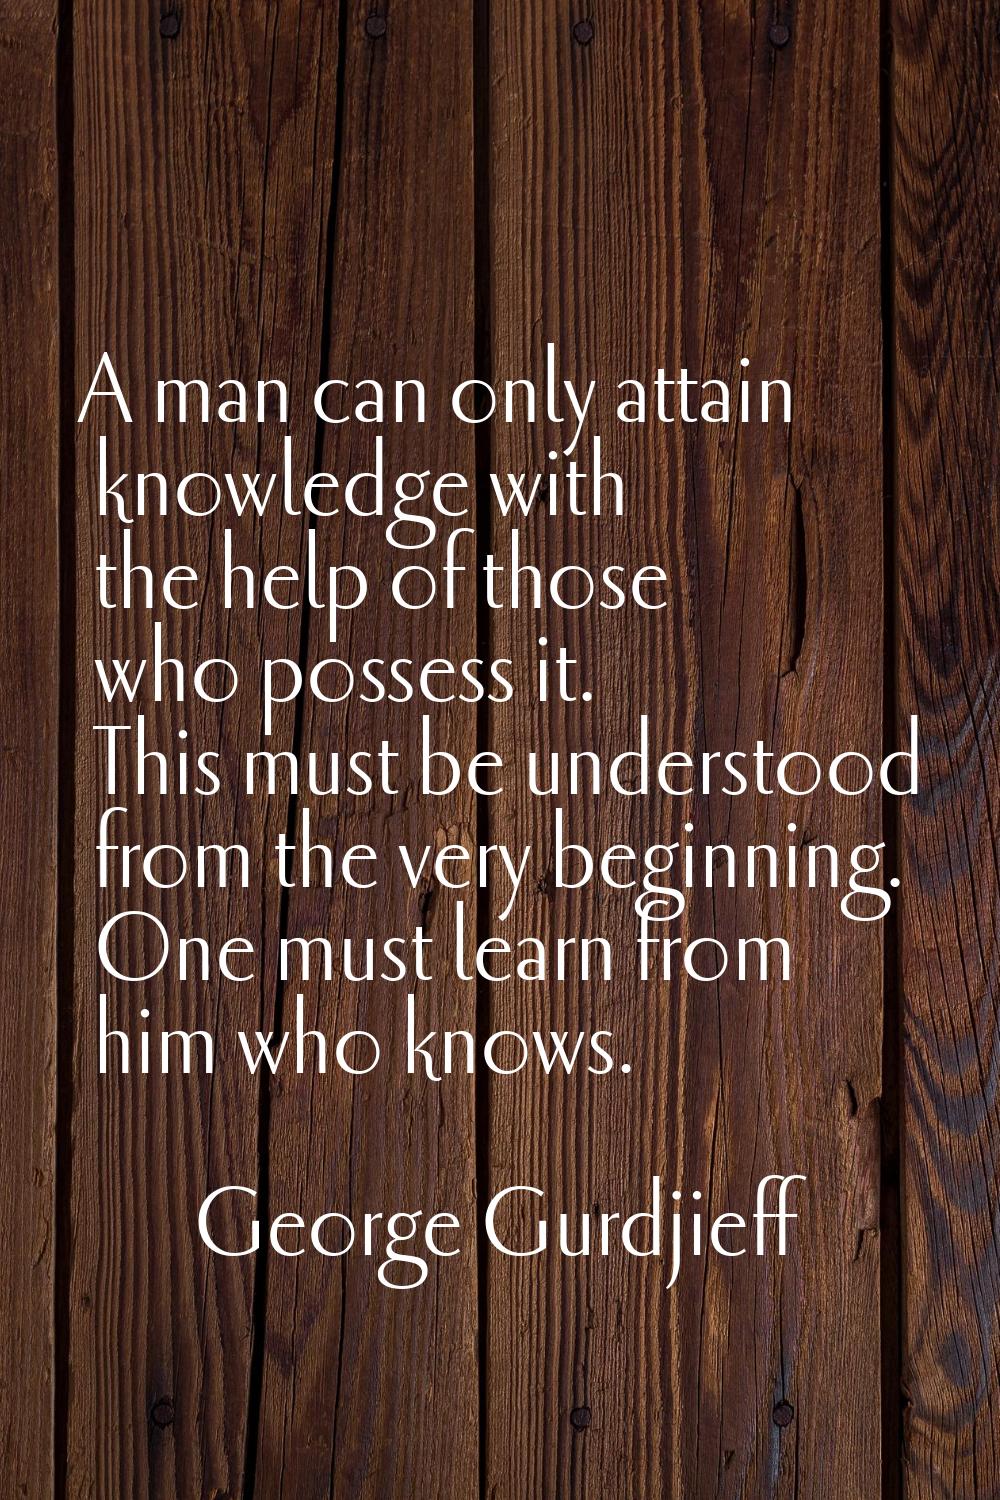 A man can only attain knowledge with the help of those who possess it. This must be understood from